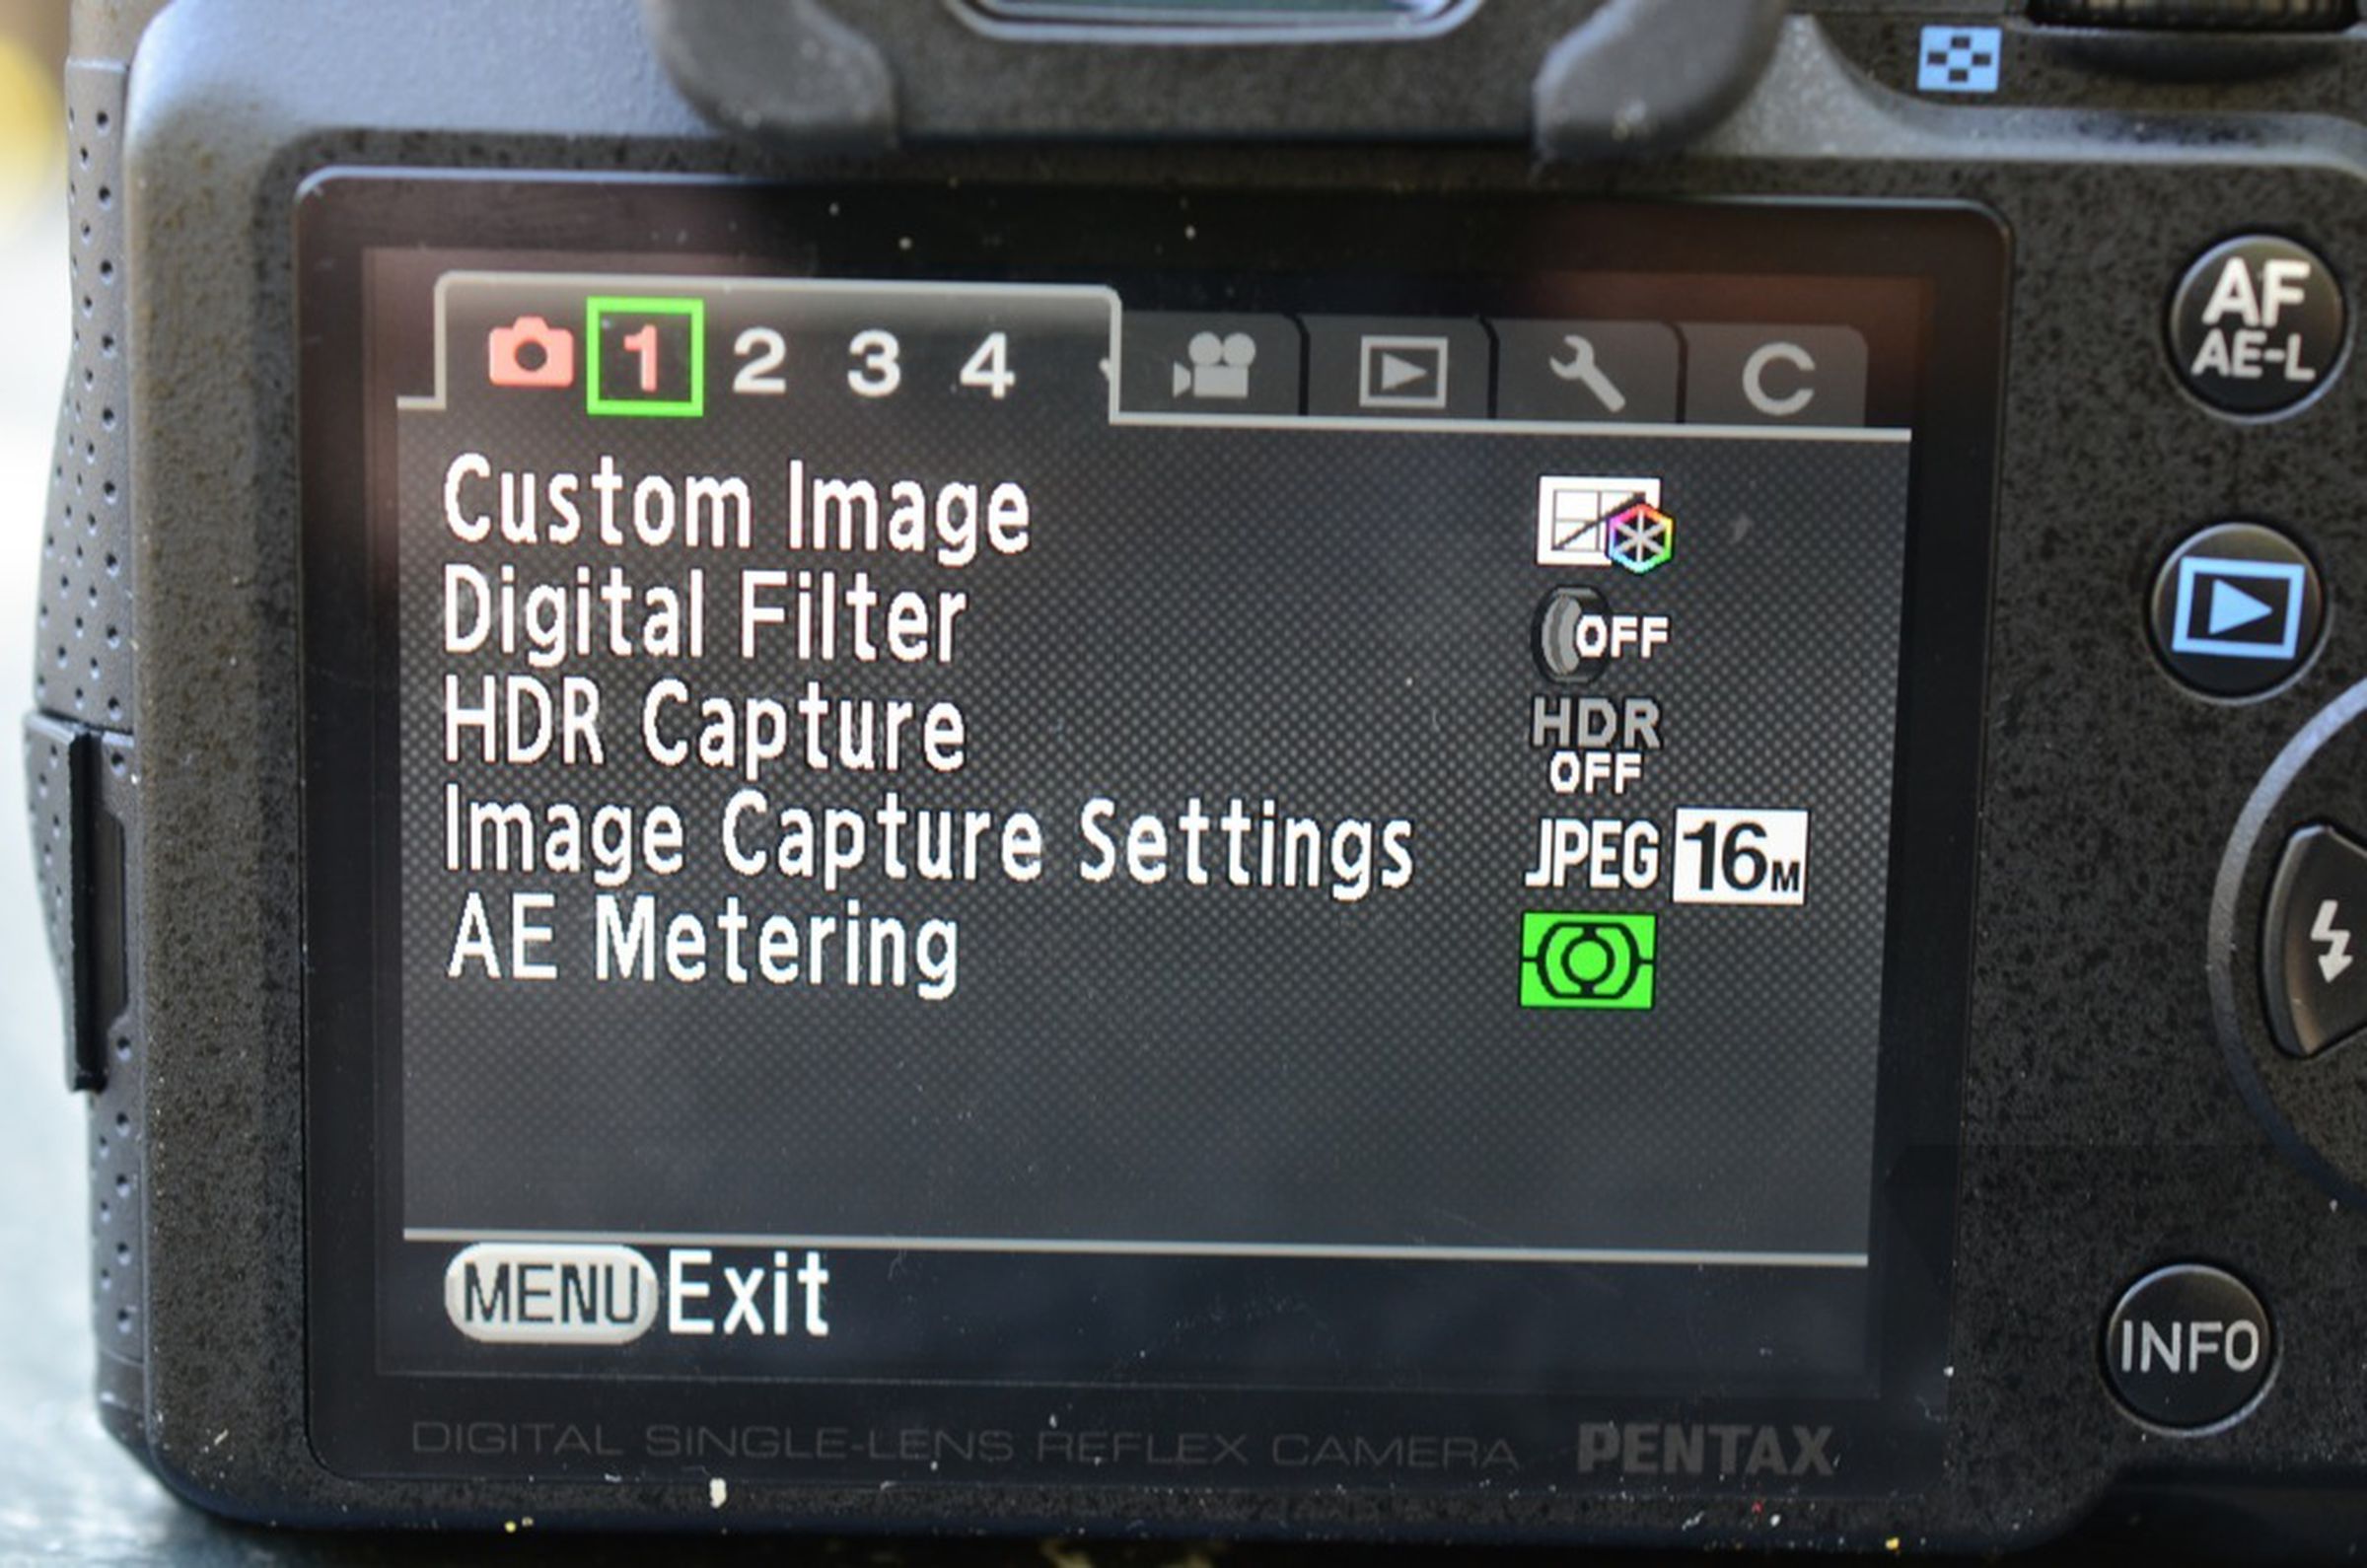 Pentax K-30 review pictures